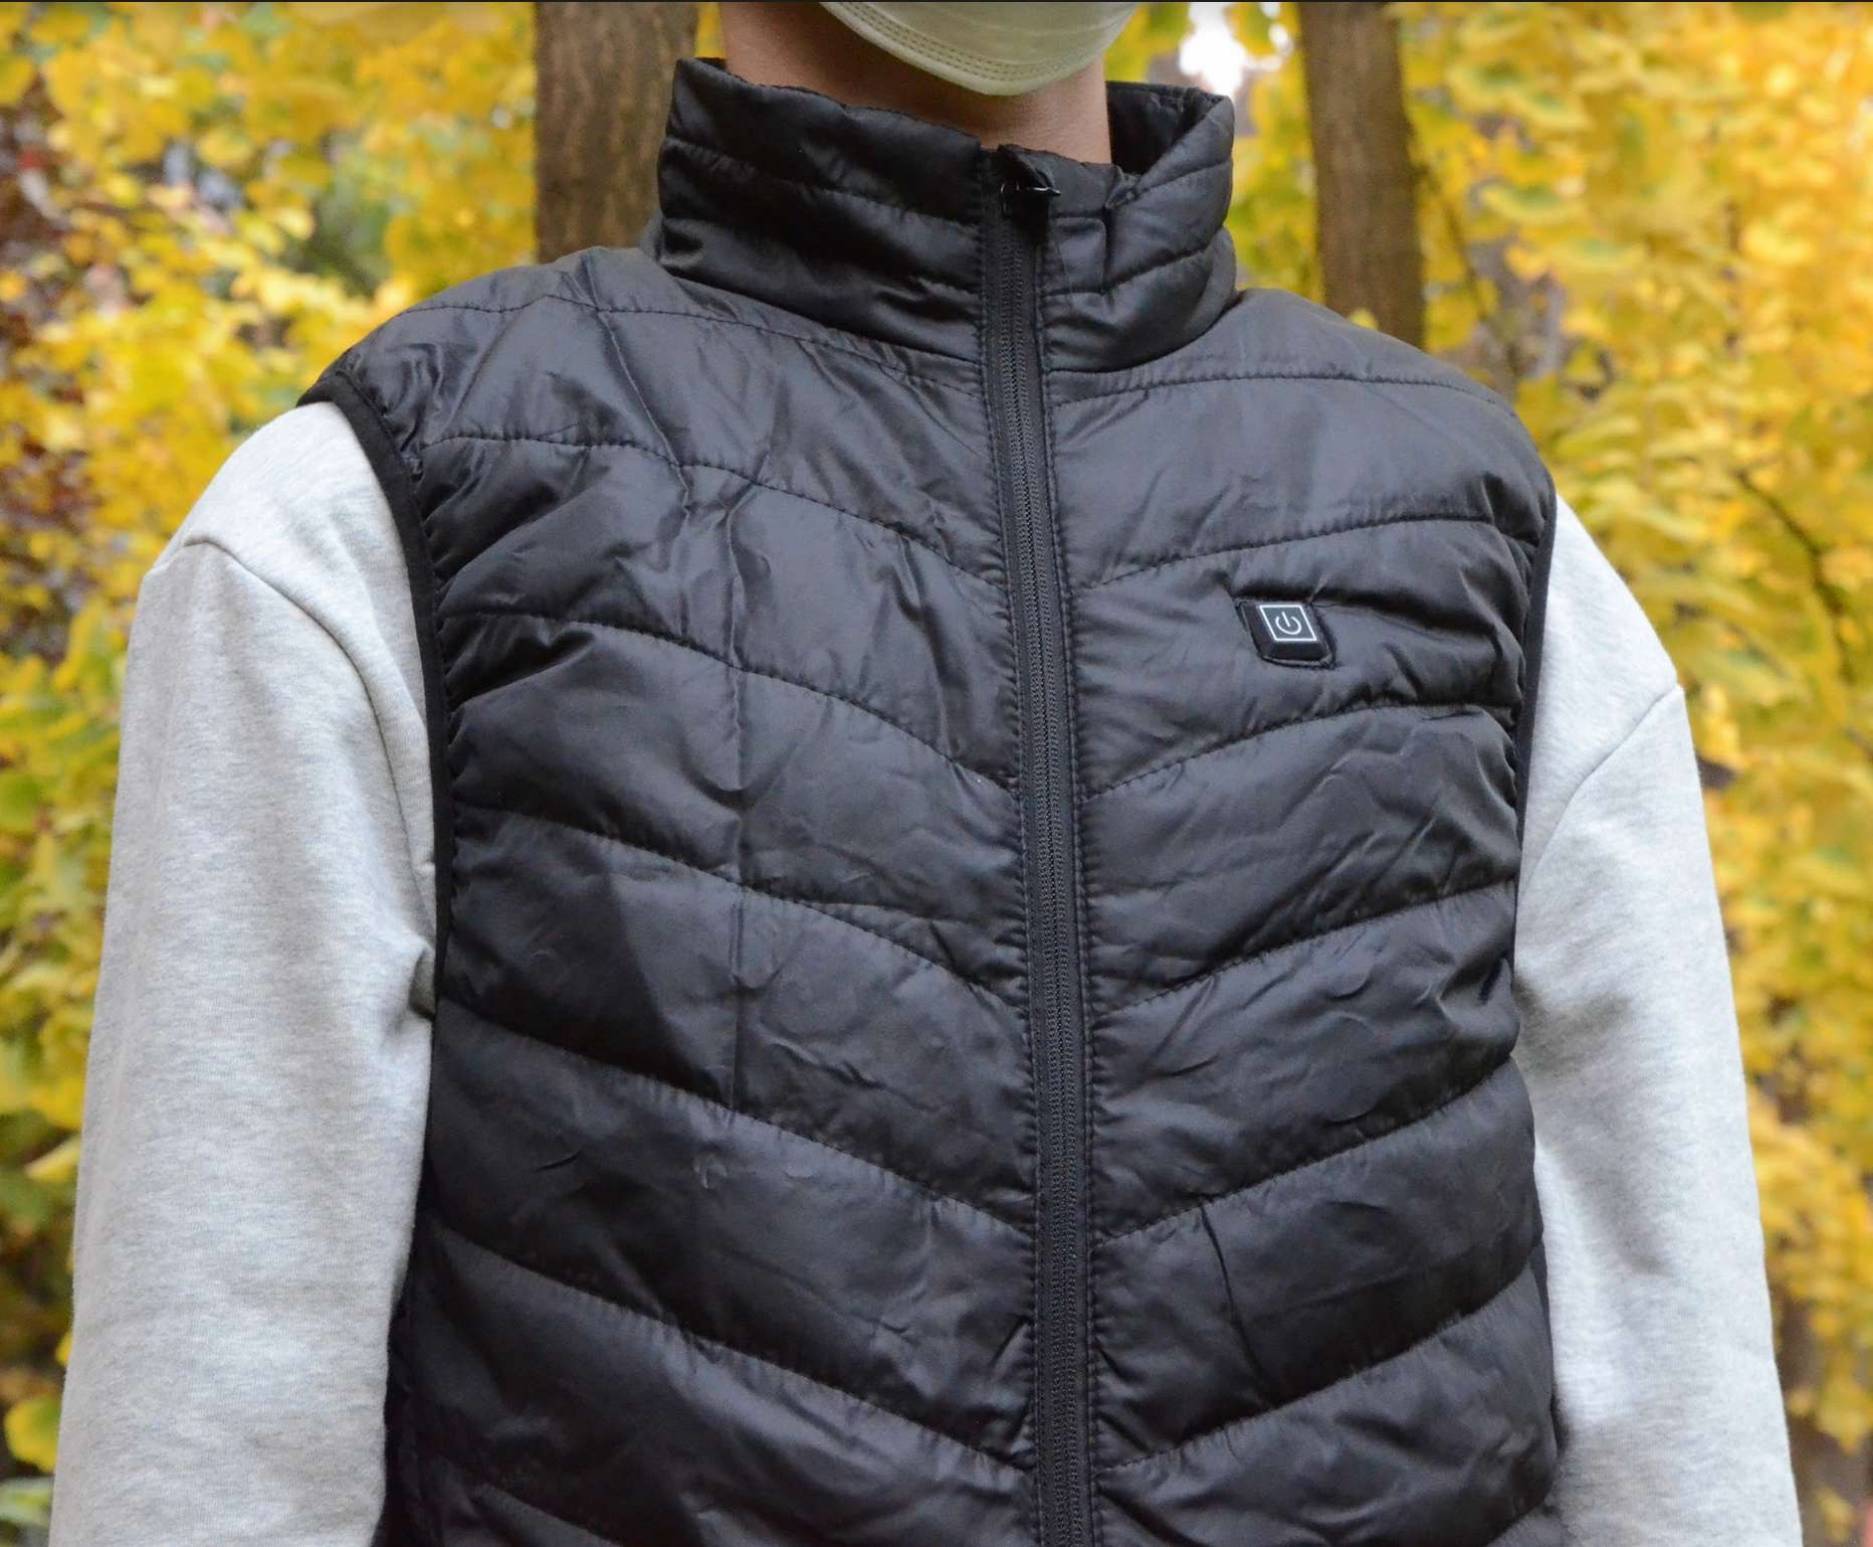 How To Charge Heated Vest